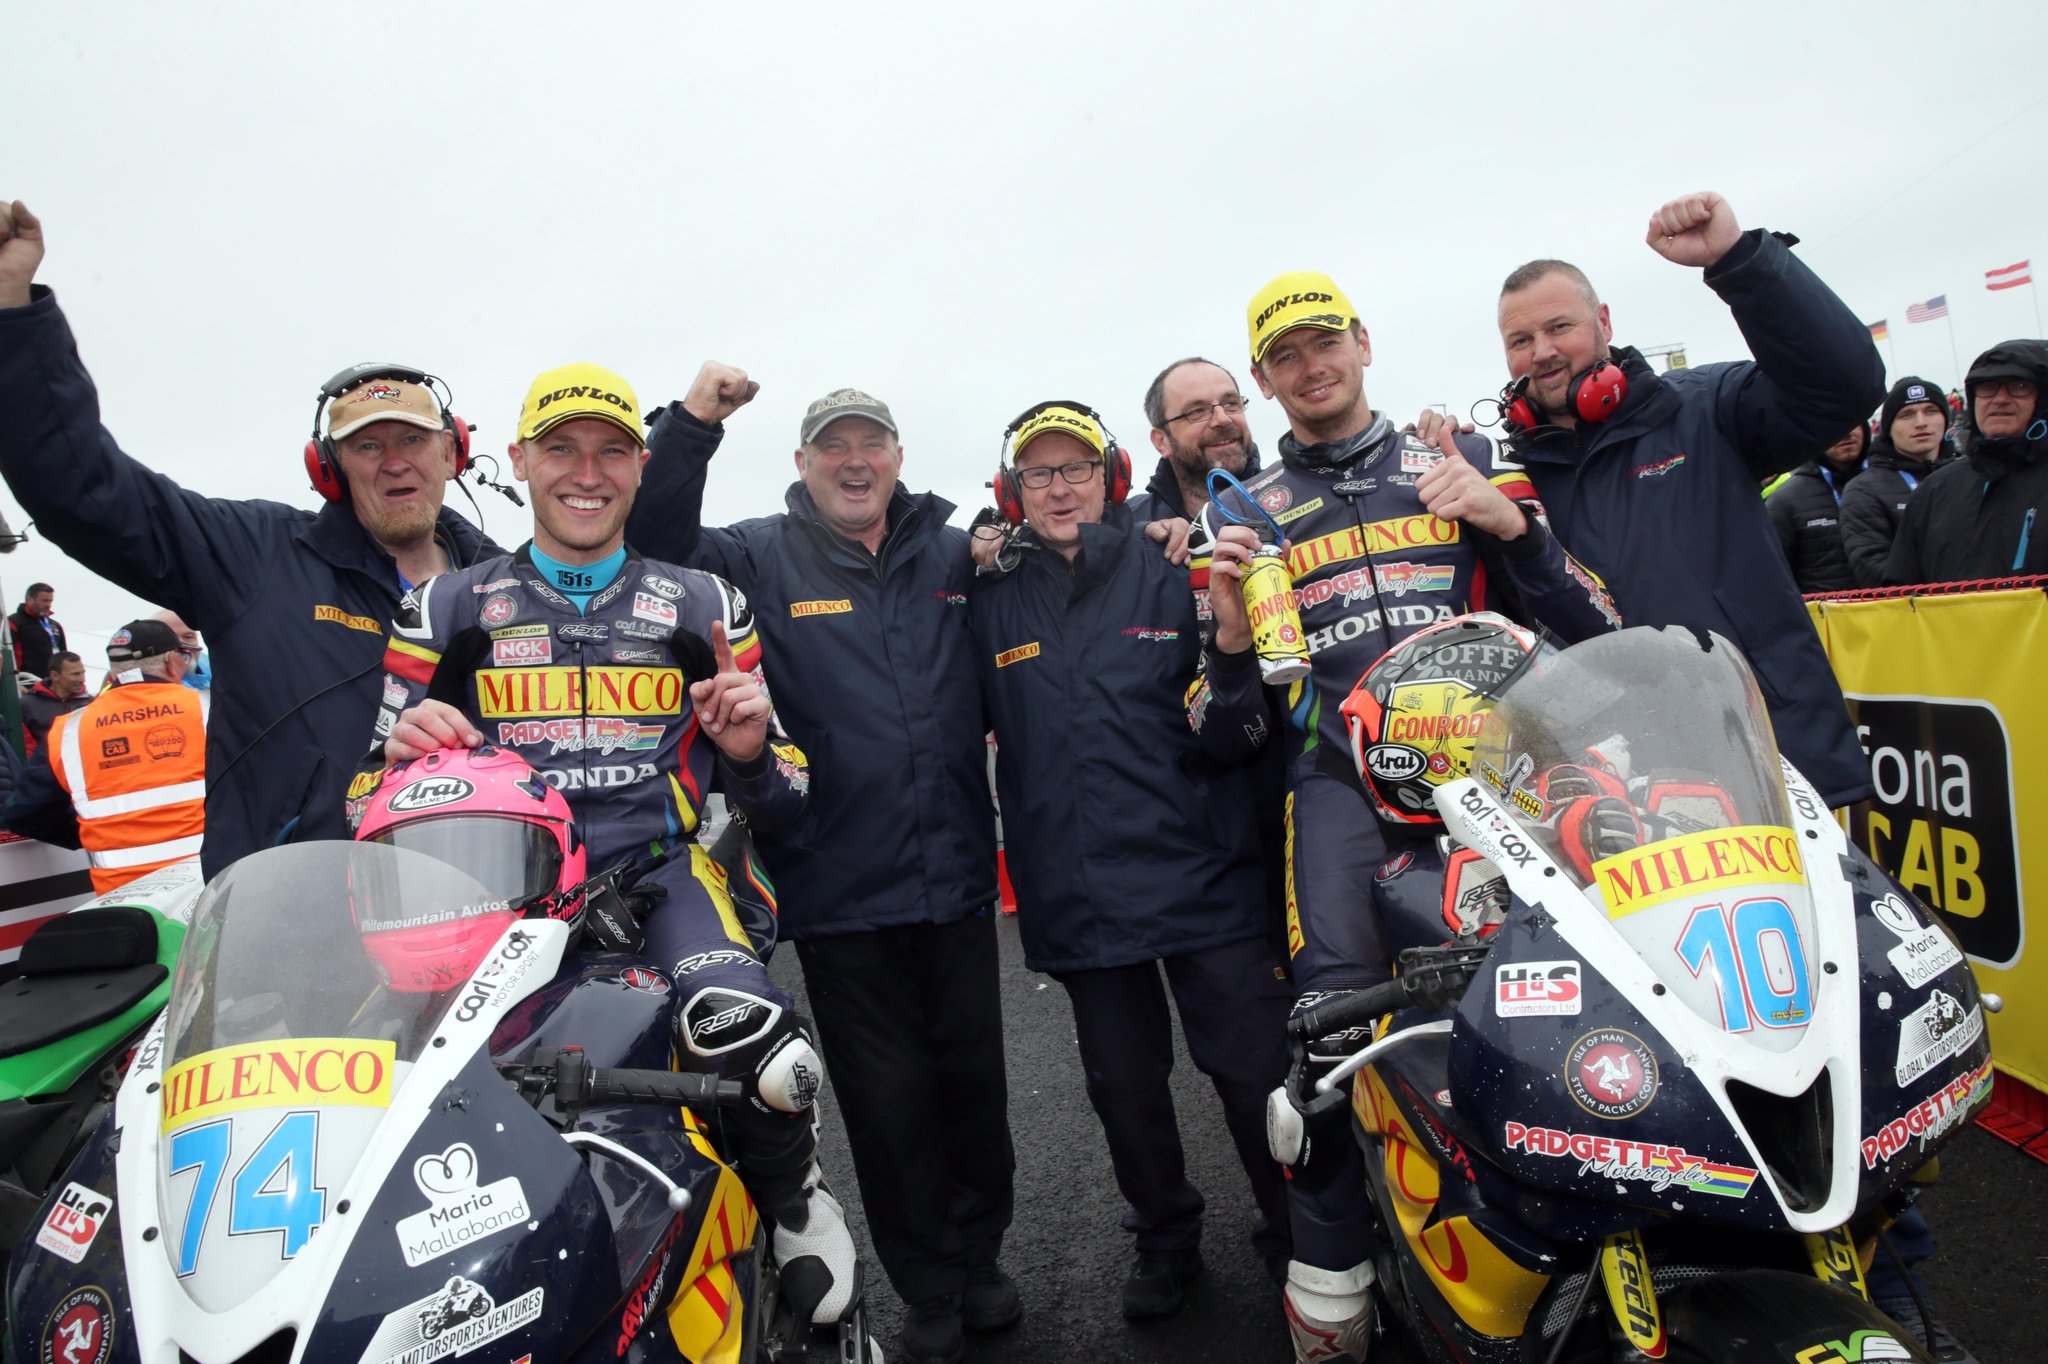 Davey Todd and Conor Cummins lead charge for Padgett's Honda at North West 200